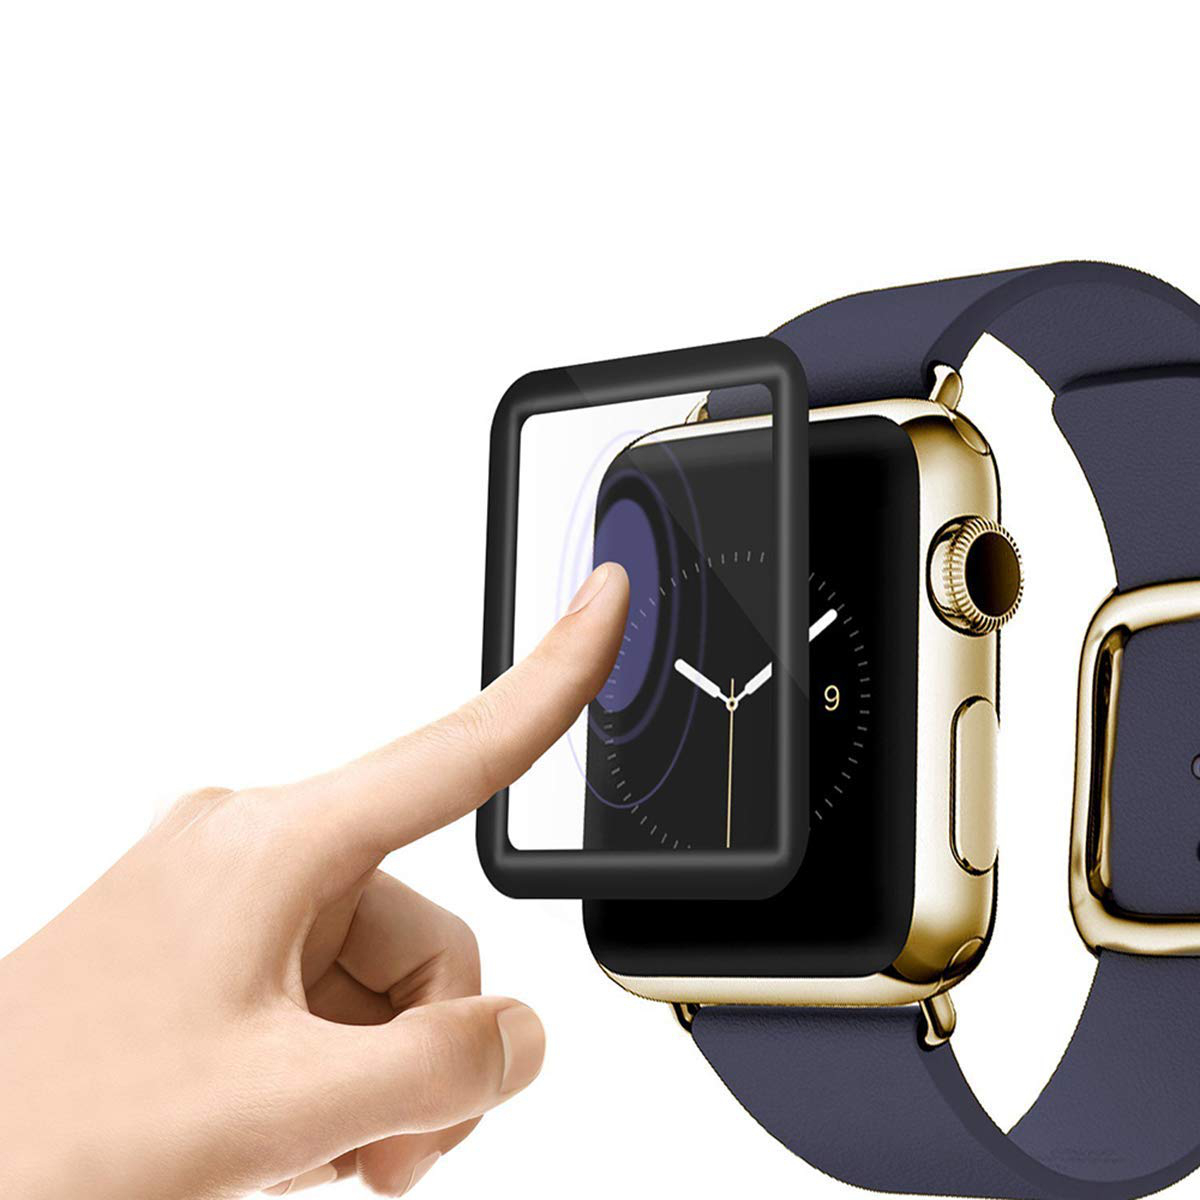 Find Bakeey 3D Curved Edge Tempered Glass Screen Protector For Apple Watch Series 4 Apple Series 5 40mm/44mm for Sale on Gipsybee.com with cryptocurrencies